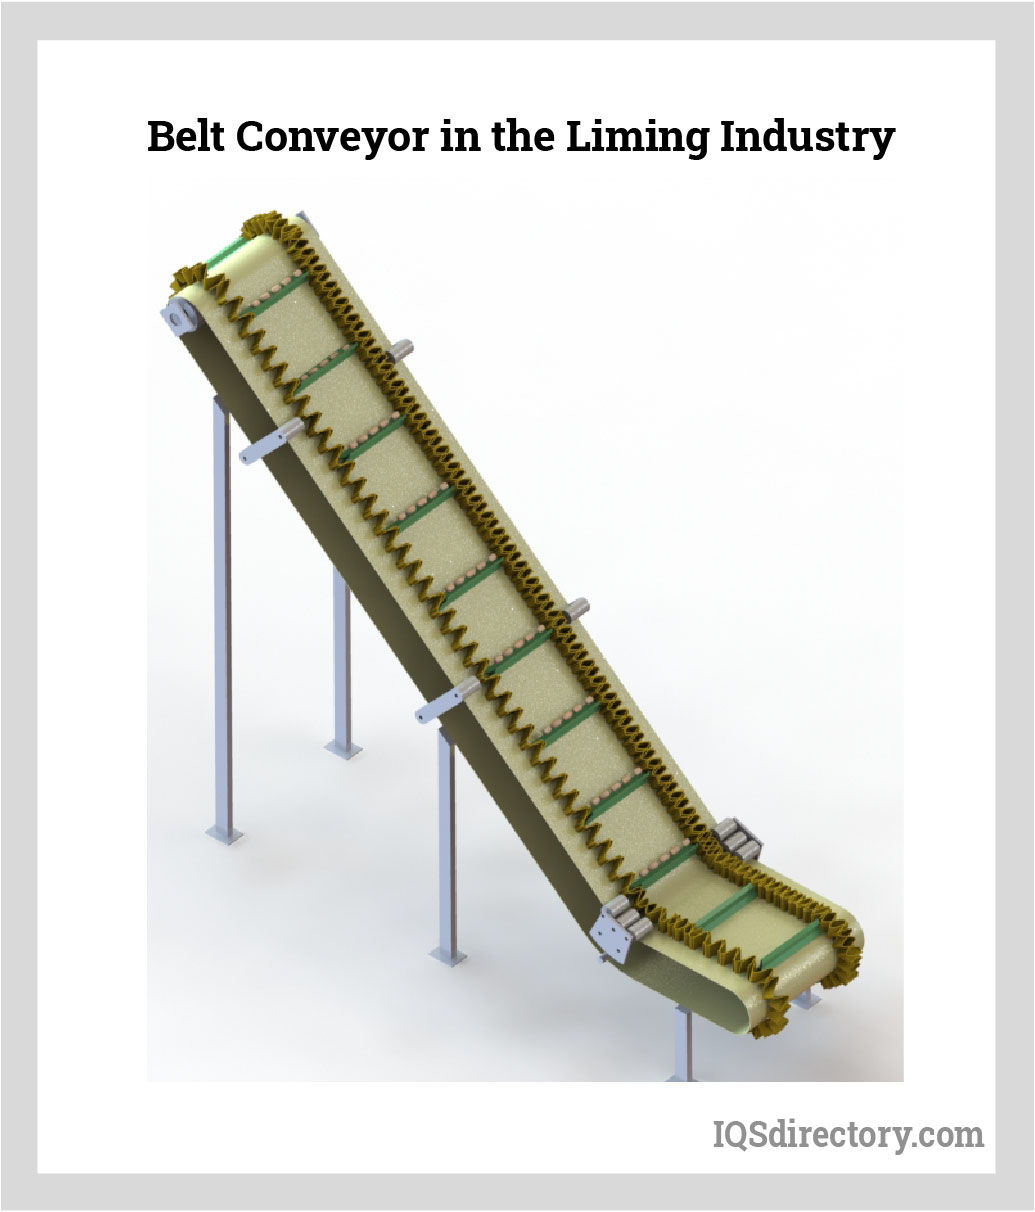 Conveyor Belts: What Is It? How Does It Work? Types, Parts